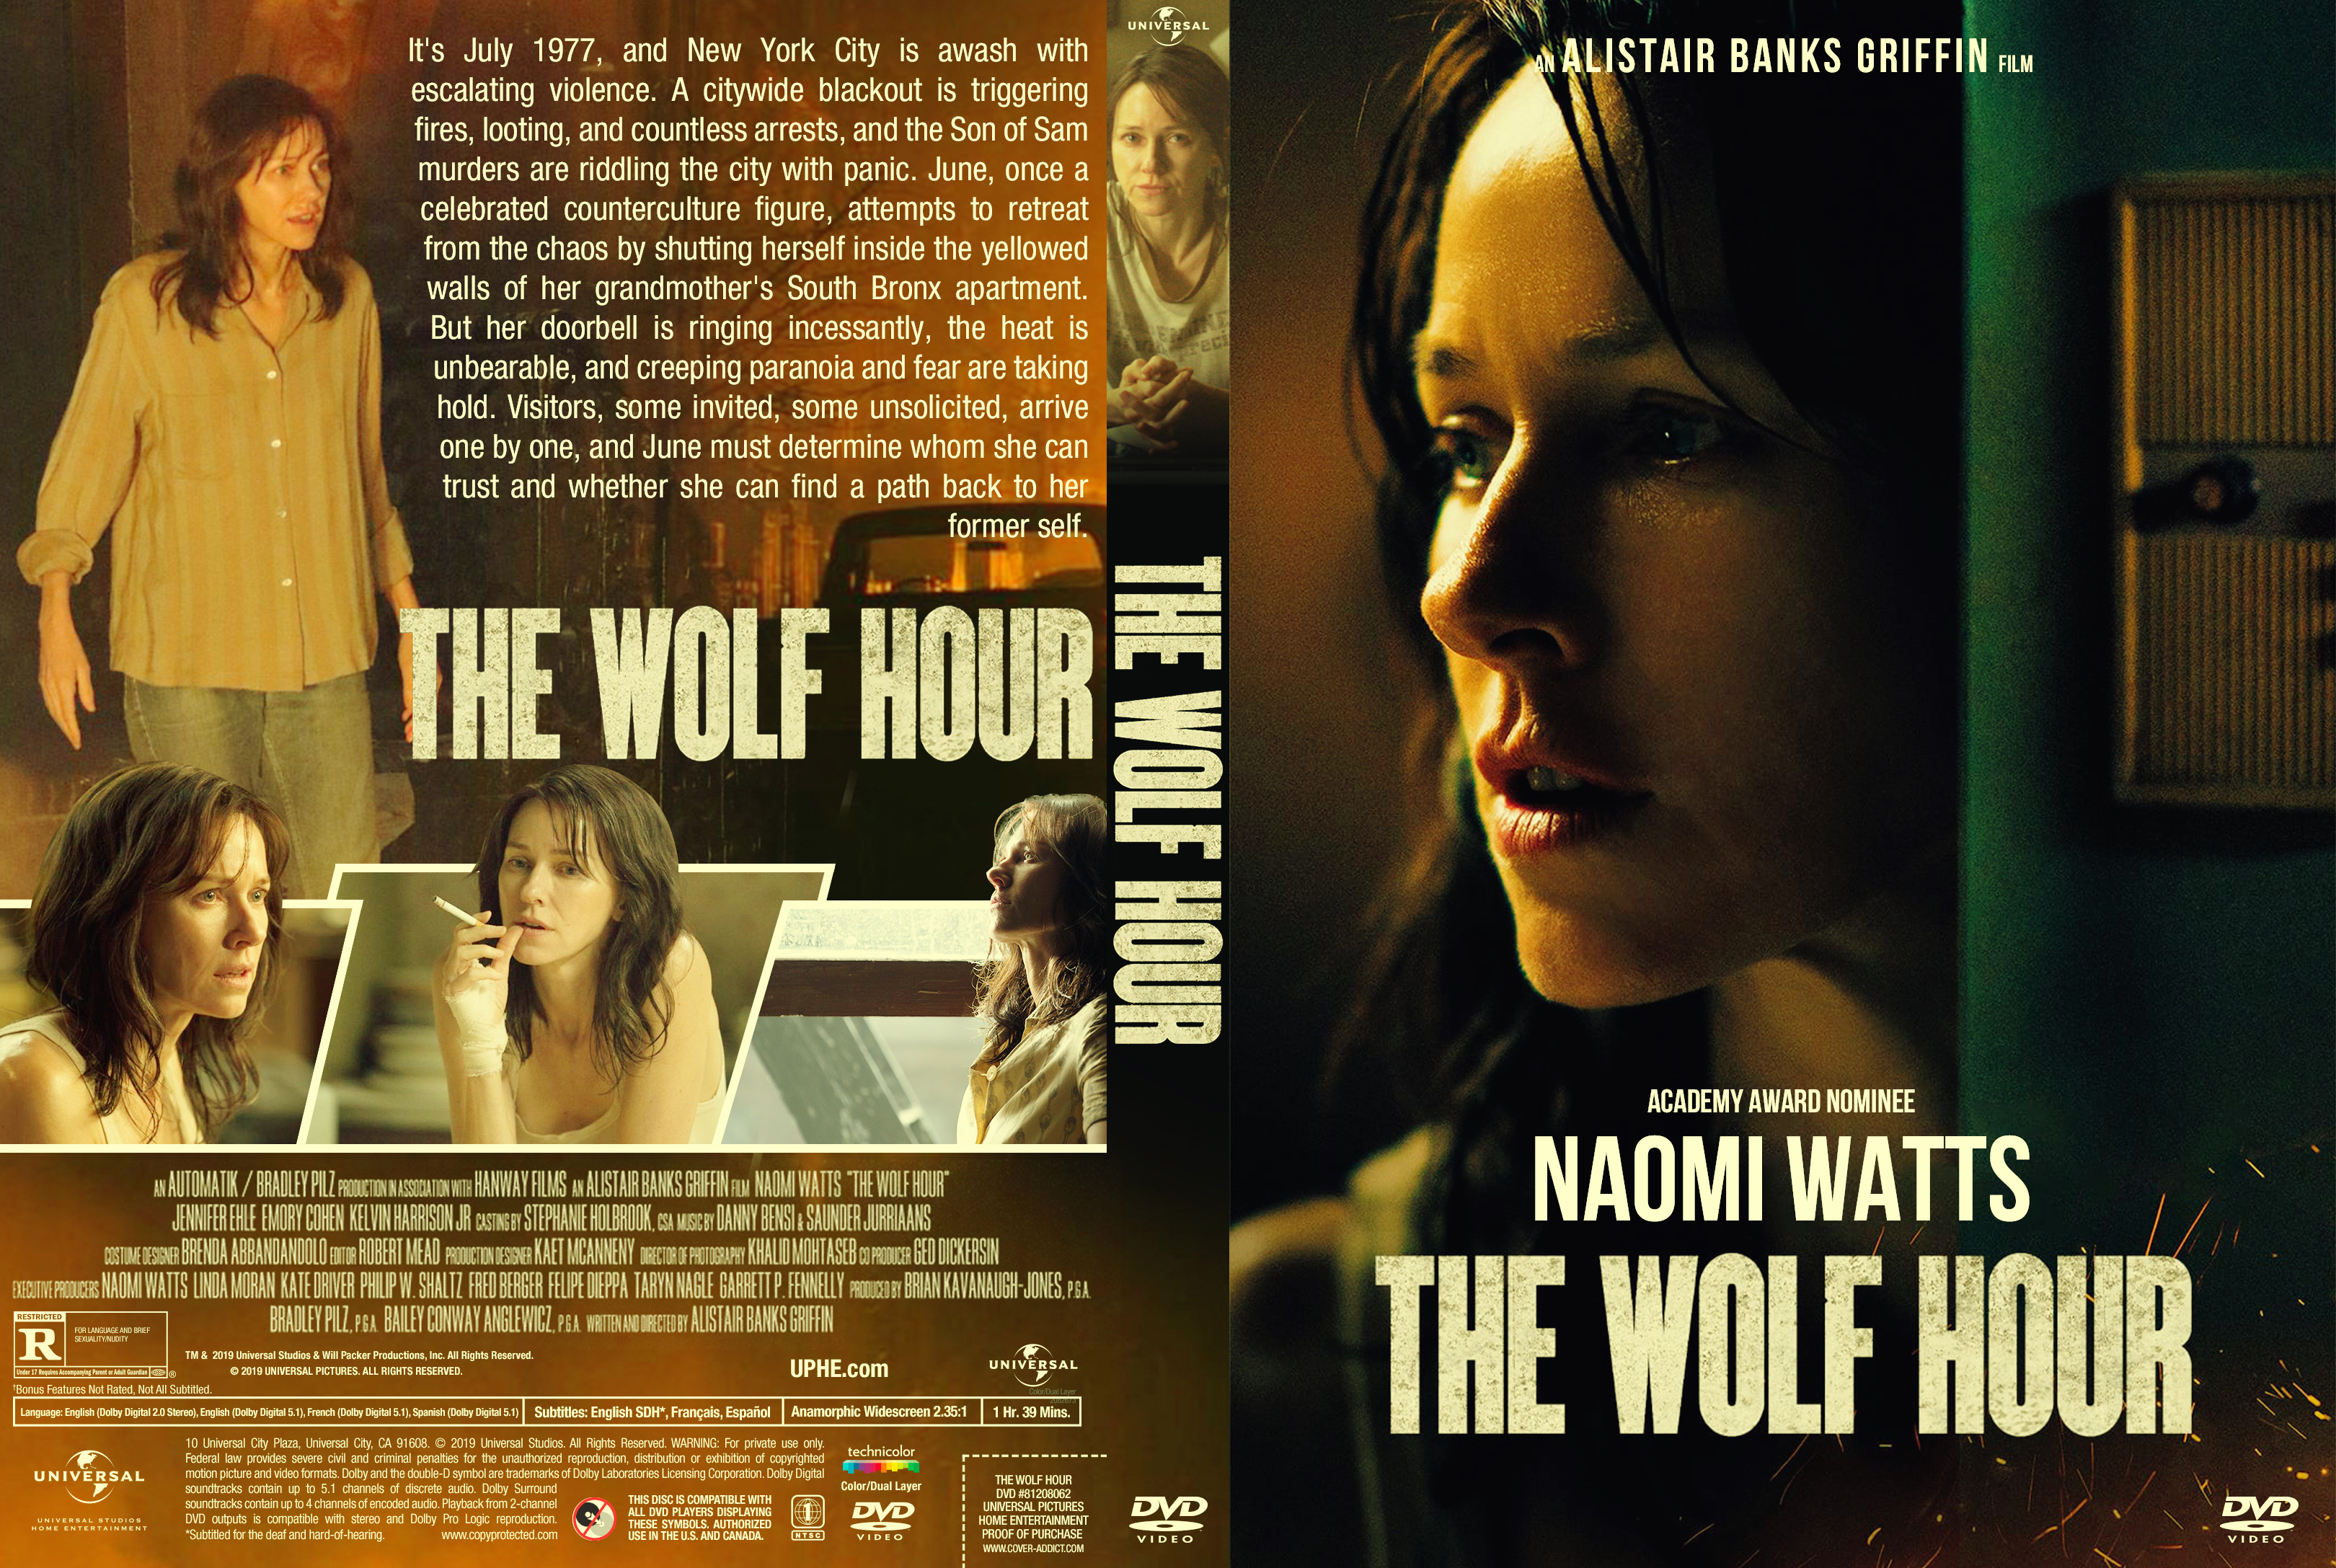 The Wolf Hour Front Dvd Covers Cover Century Over